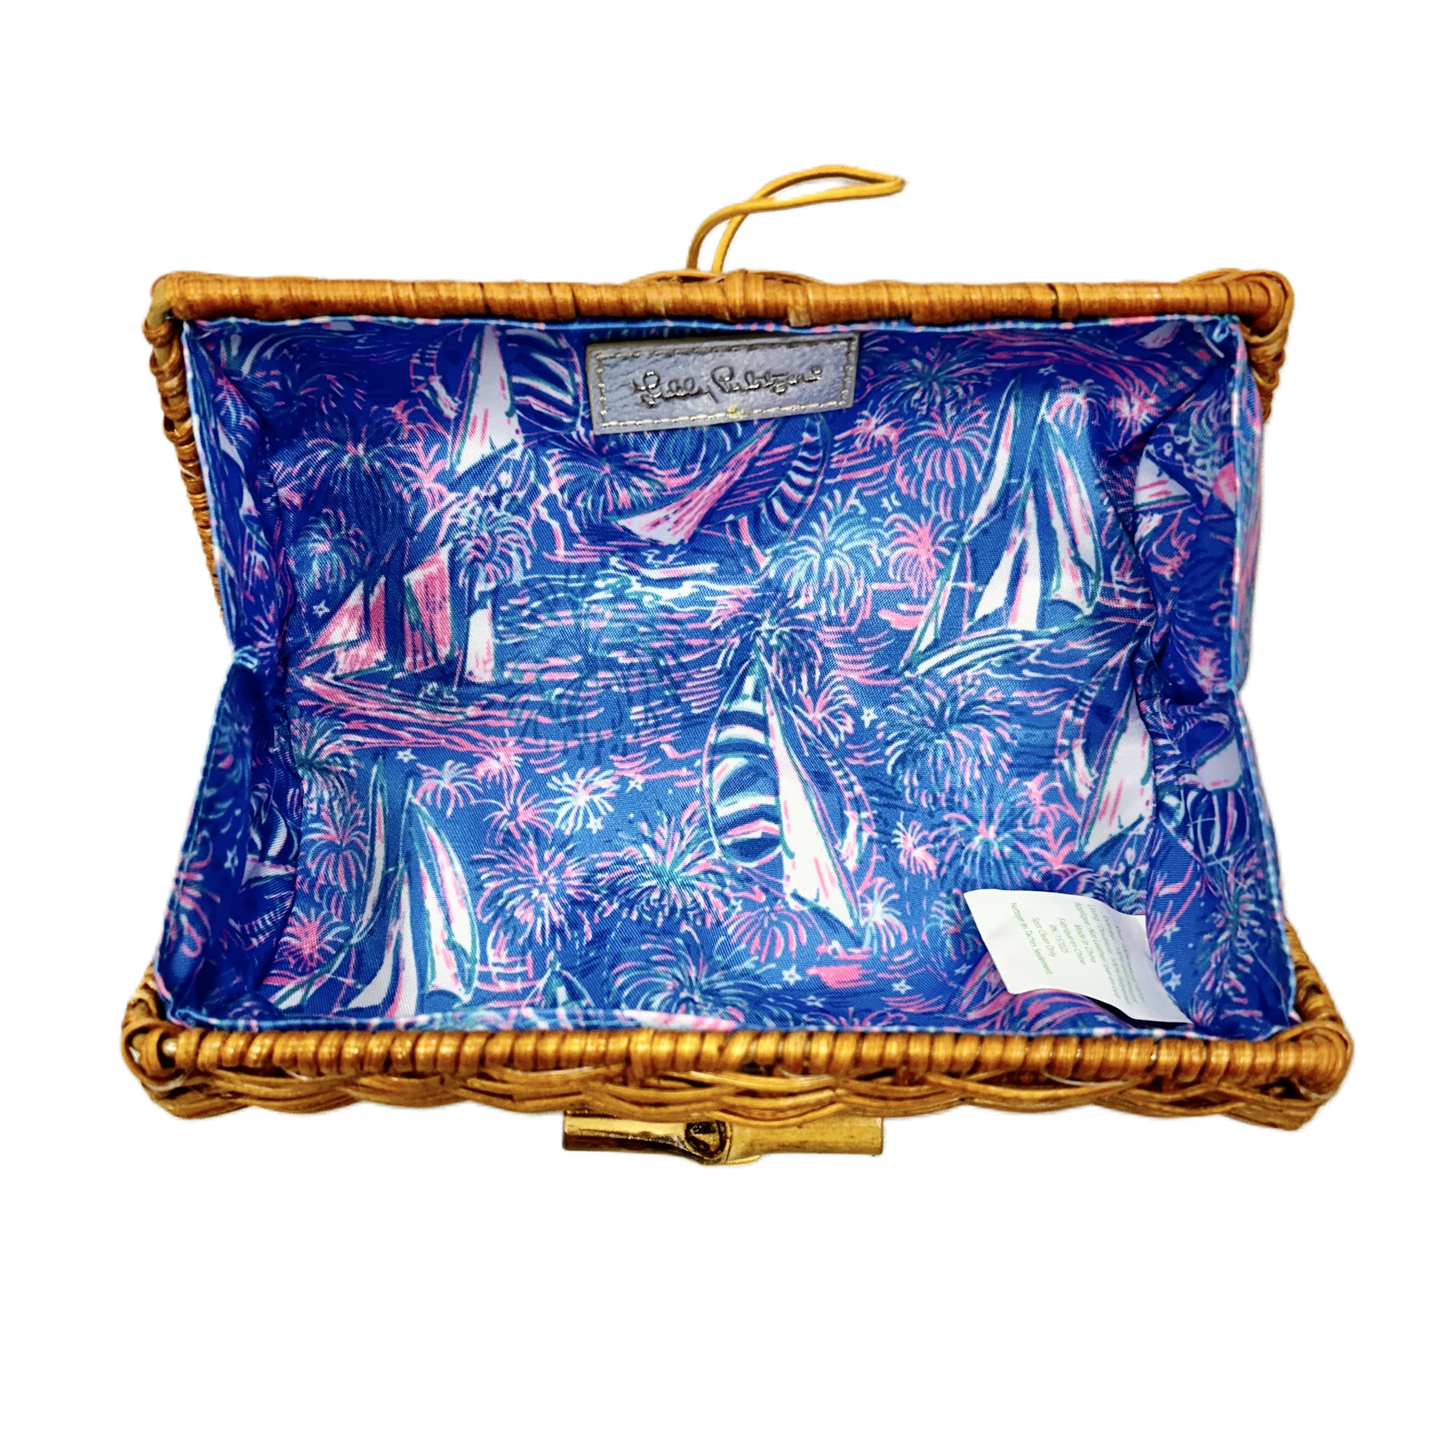 Clutch Designer By Lilly Pulitzer, Size: Small